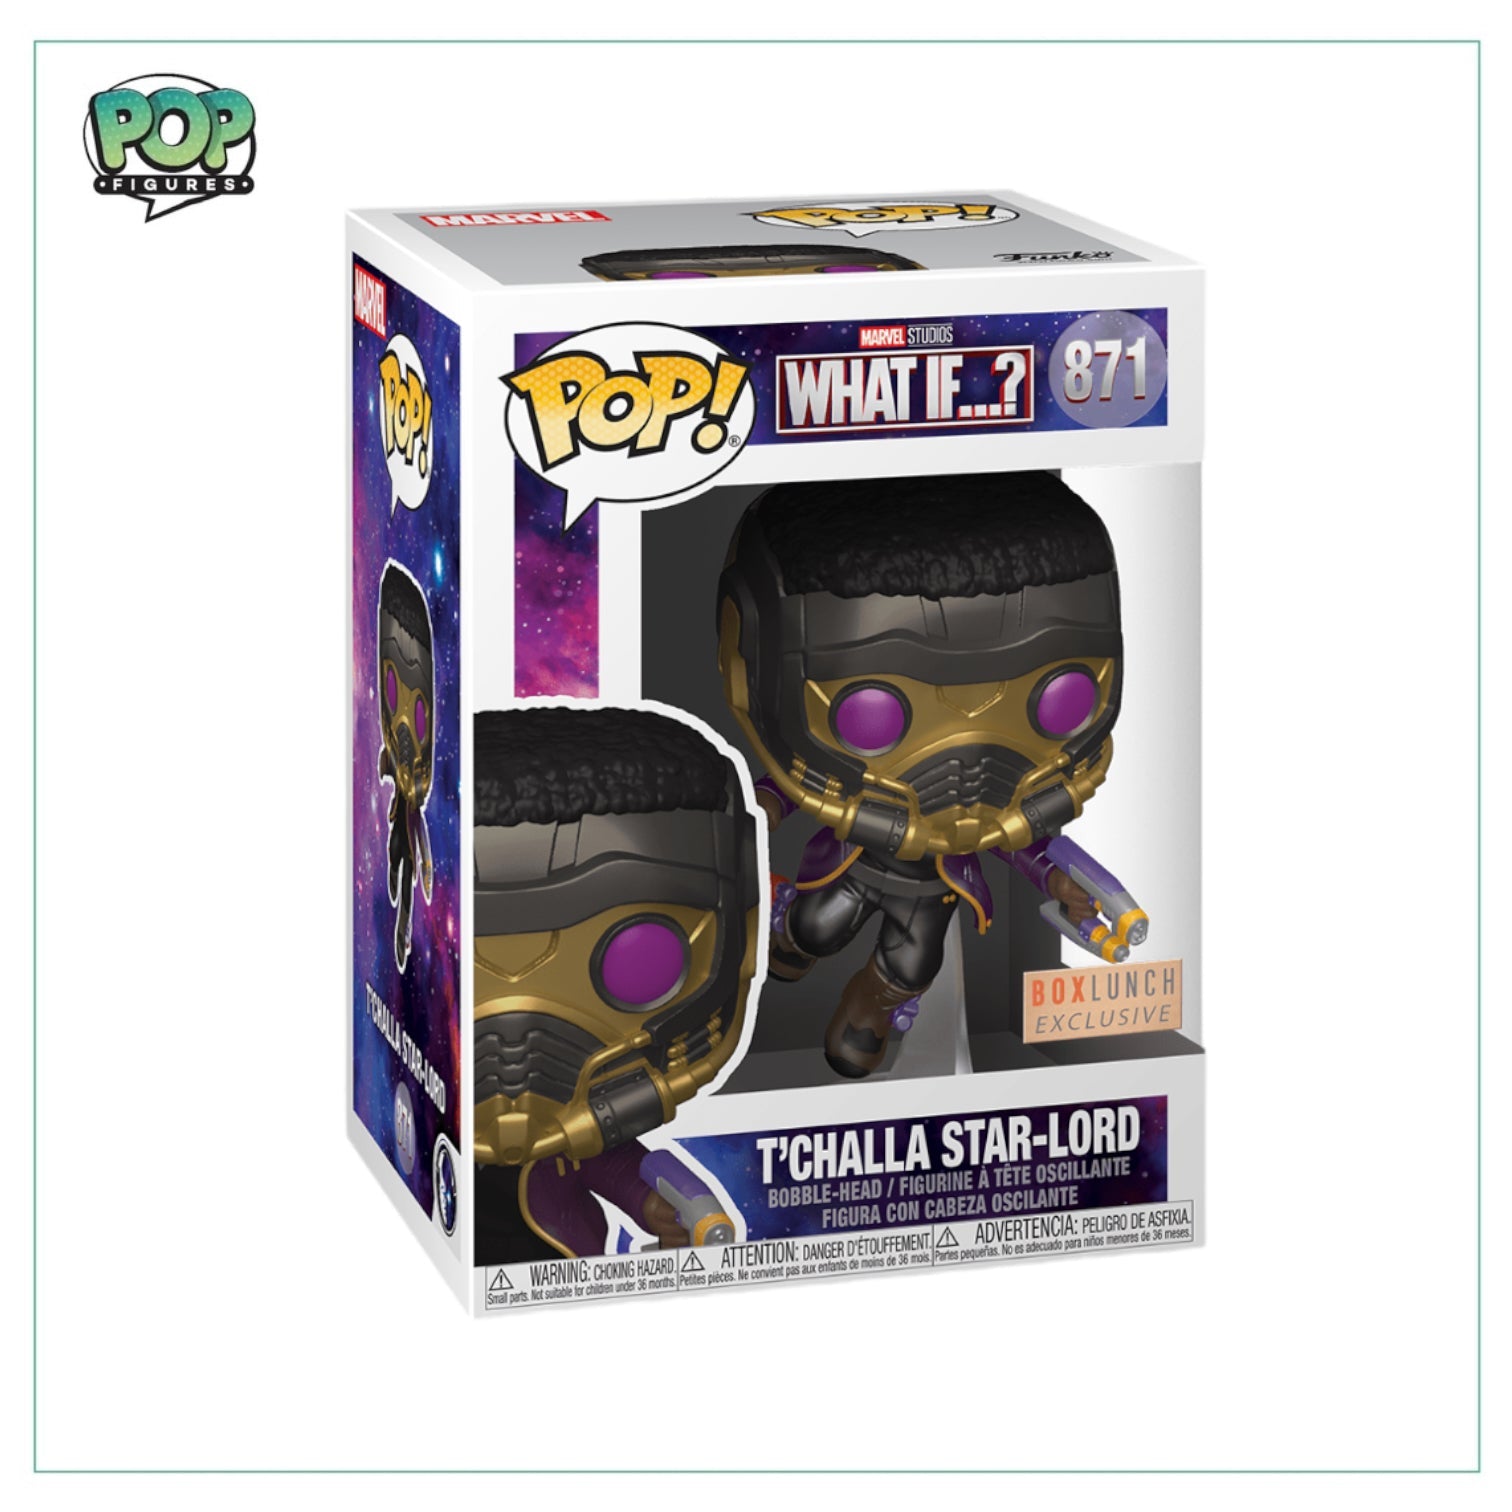 T’challa Star-Lord (Metallic) #871 Funko Pop! - What If…? - Box Lunch Exclusive - Angry Cat